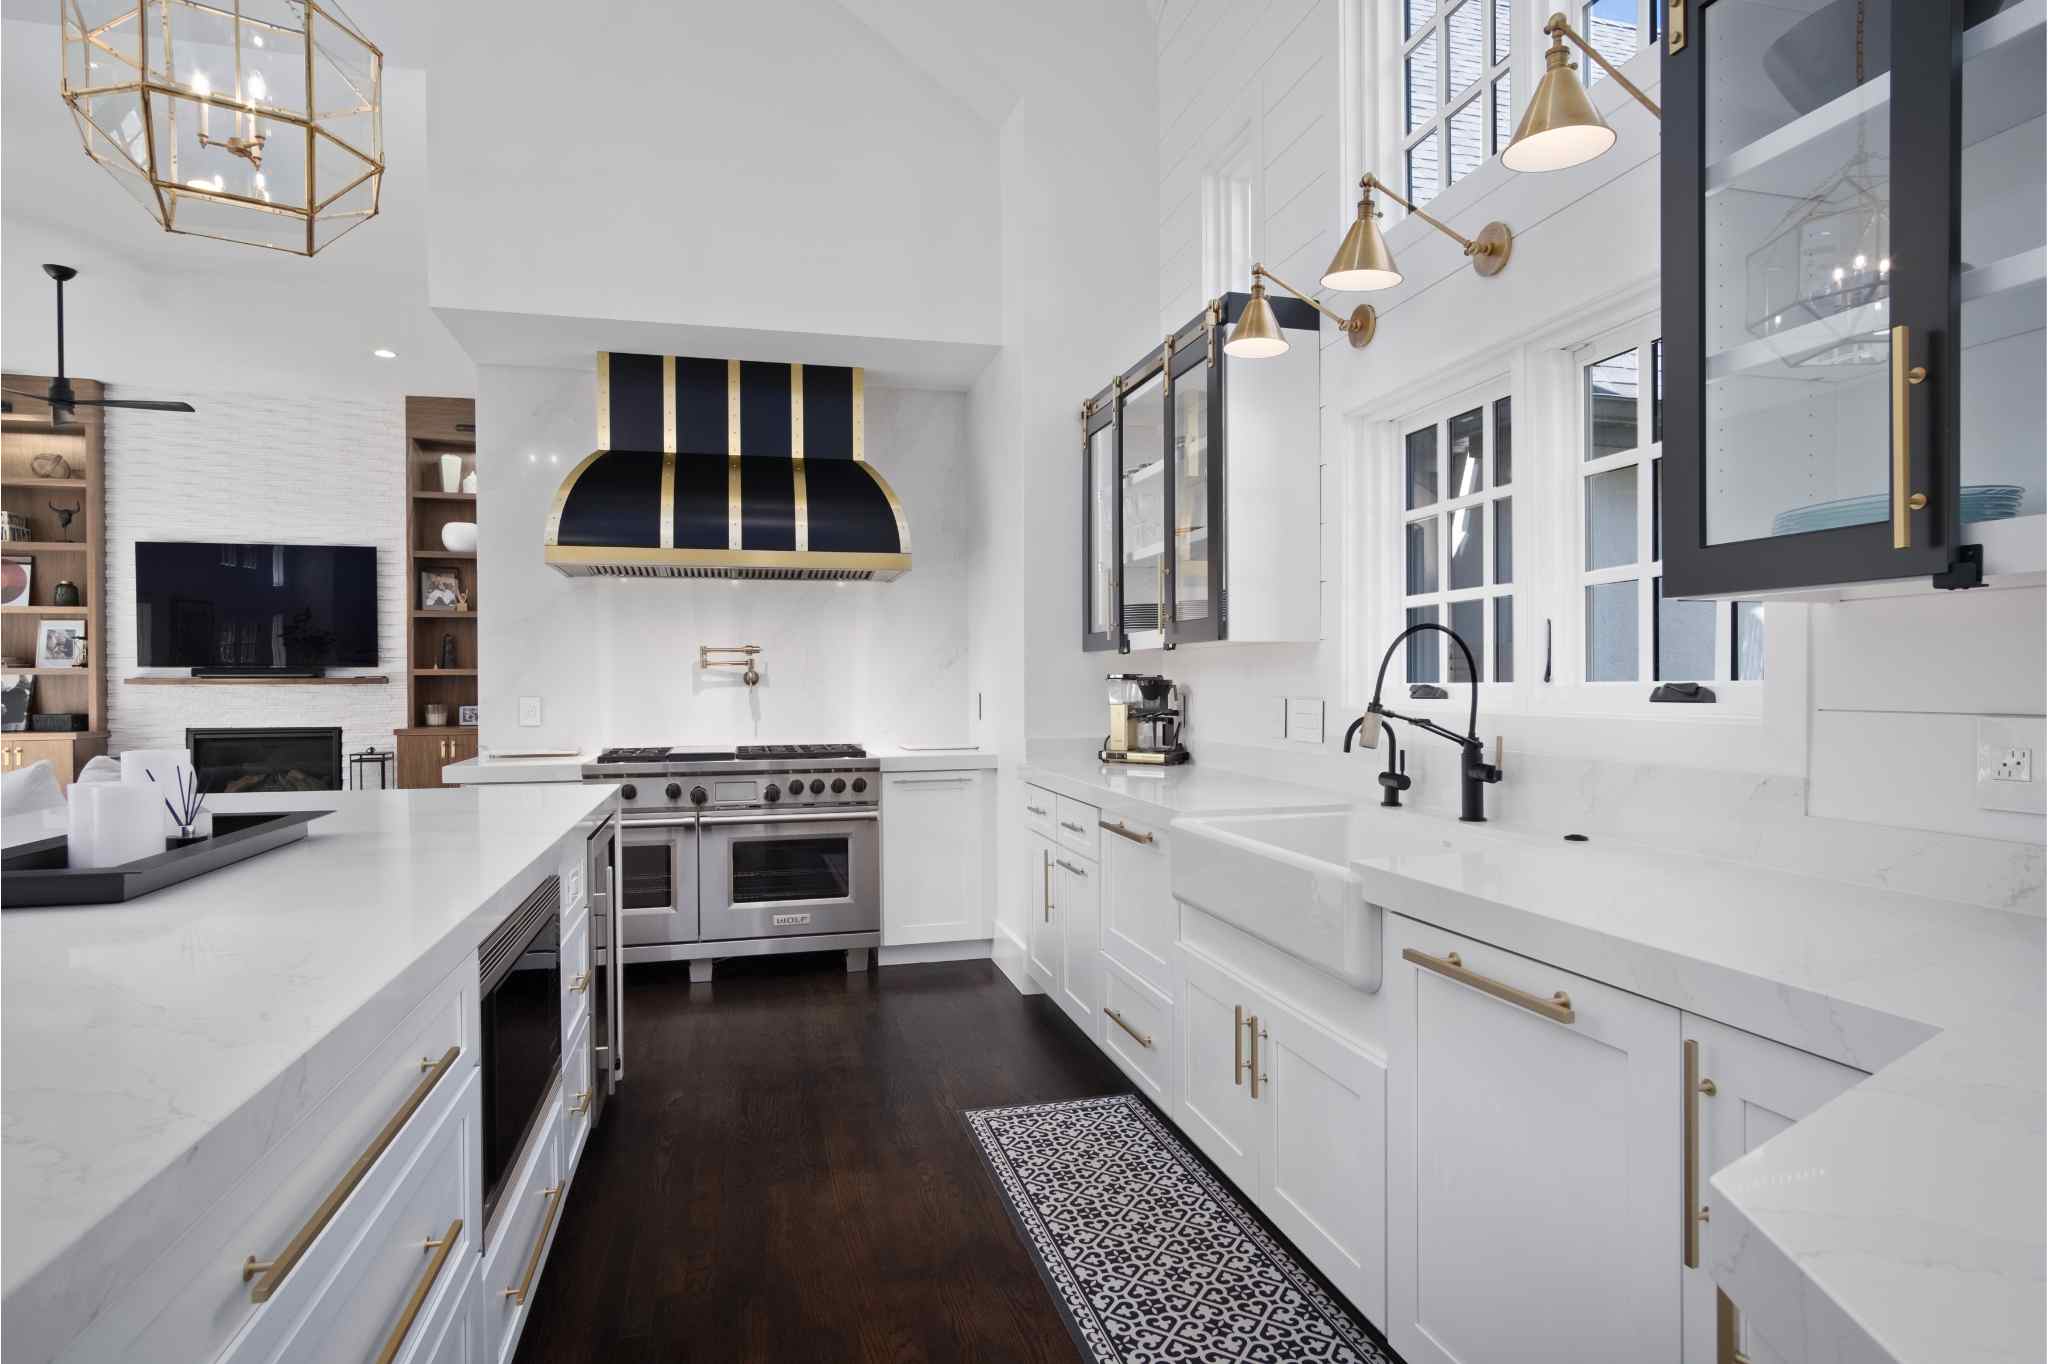 premier plumbing white kitchen with gold accents image